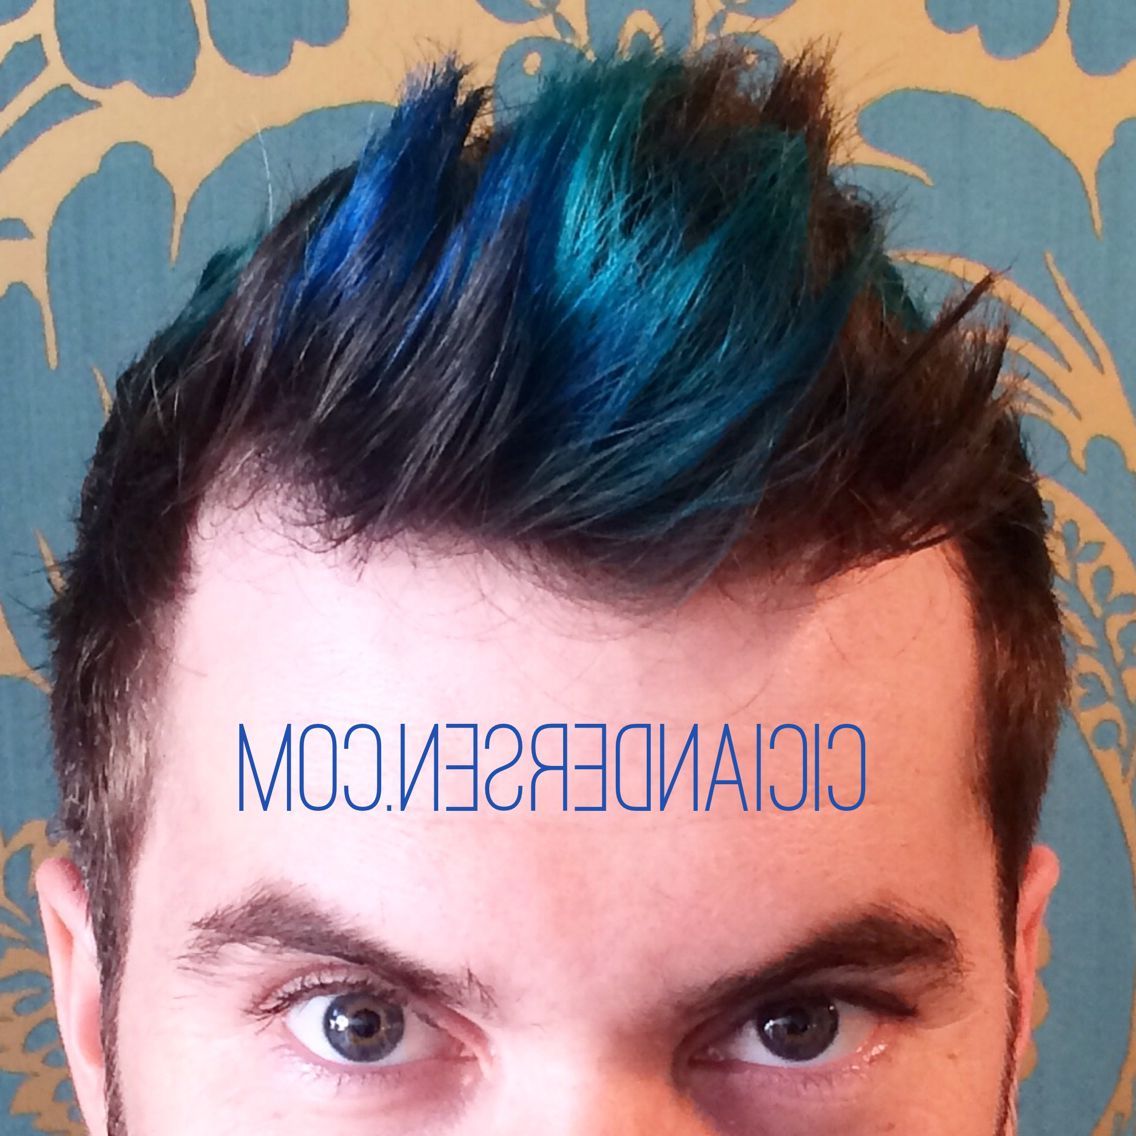 Newest Mohawk Hairstyles With Length And Frosted Tips With Teal And Blue Highlights For Men! Merman Hair Is So In Right Now (View 19 of 20)